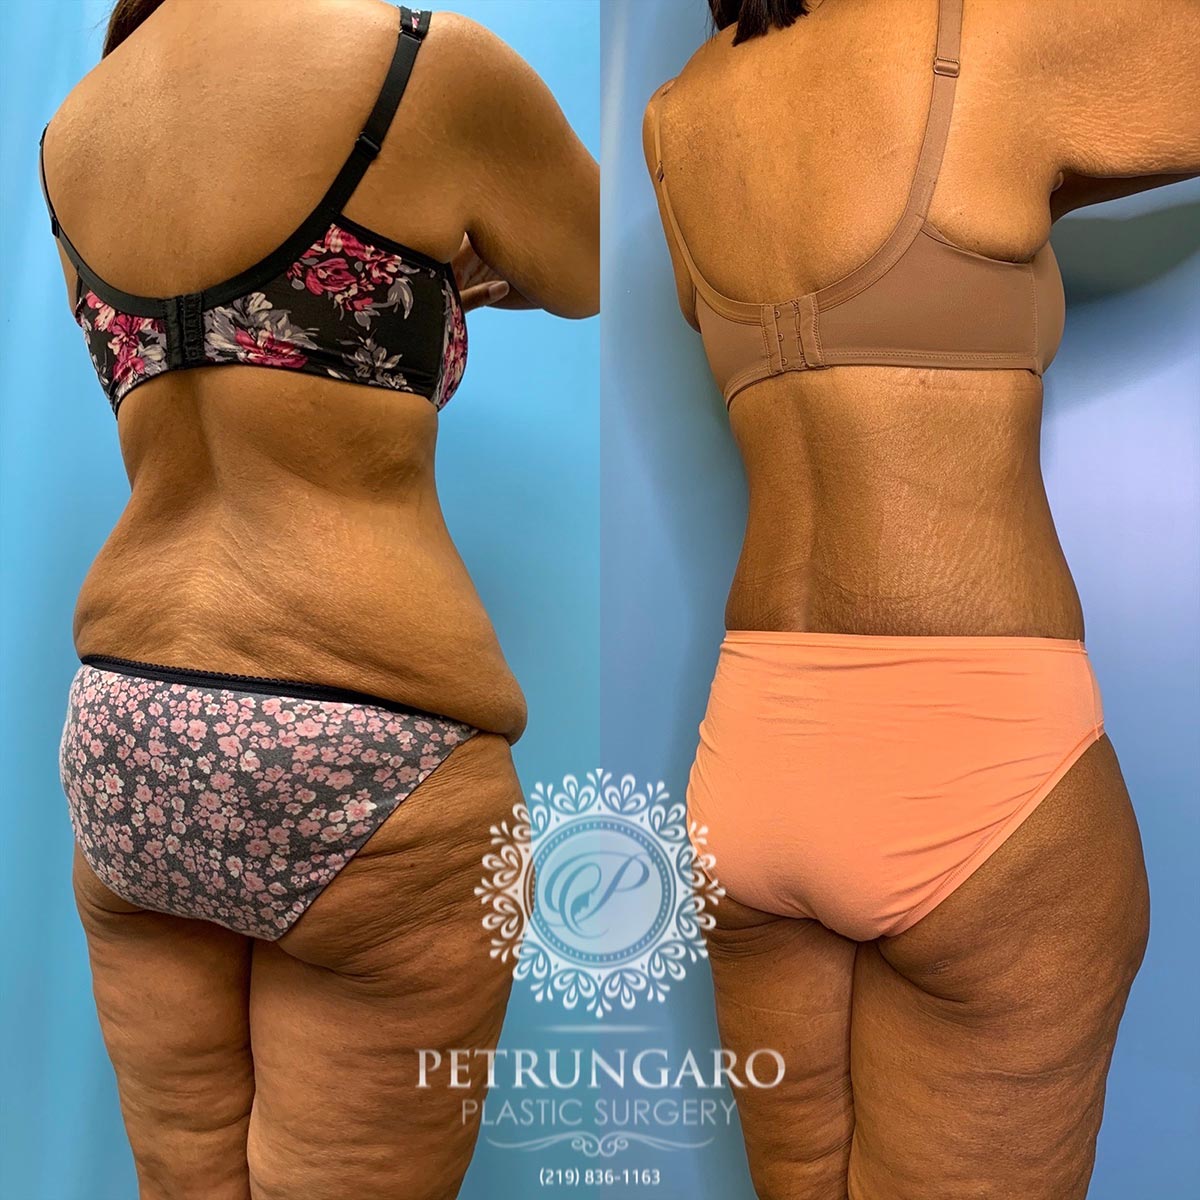 42 year old woman 3 months after a circumferential body lift-10